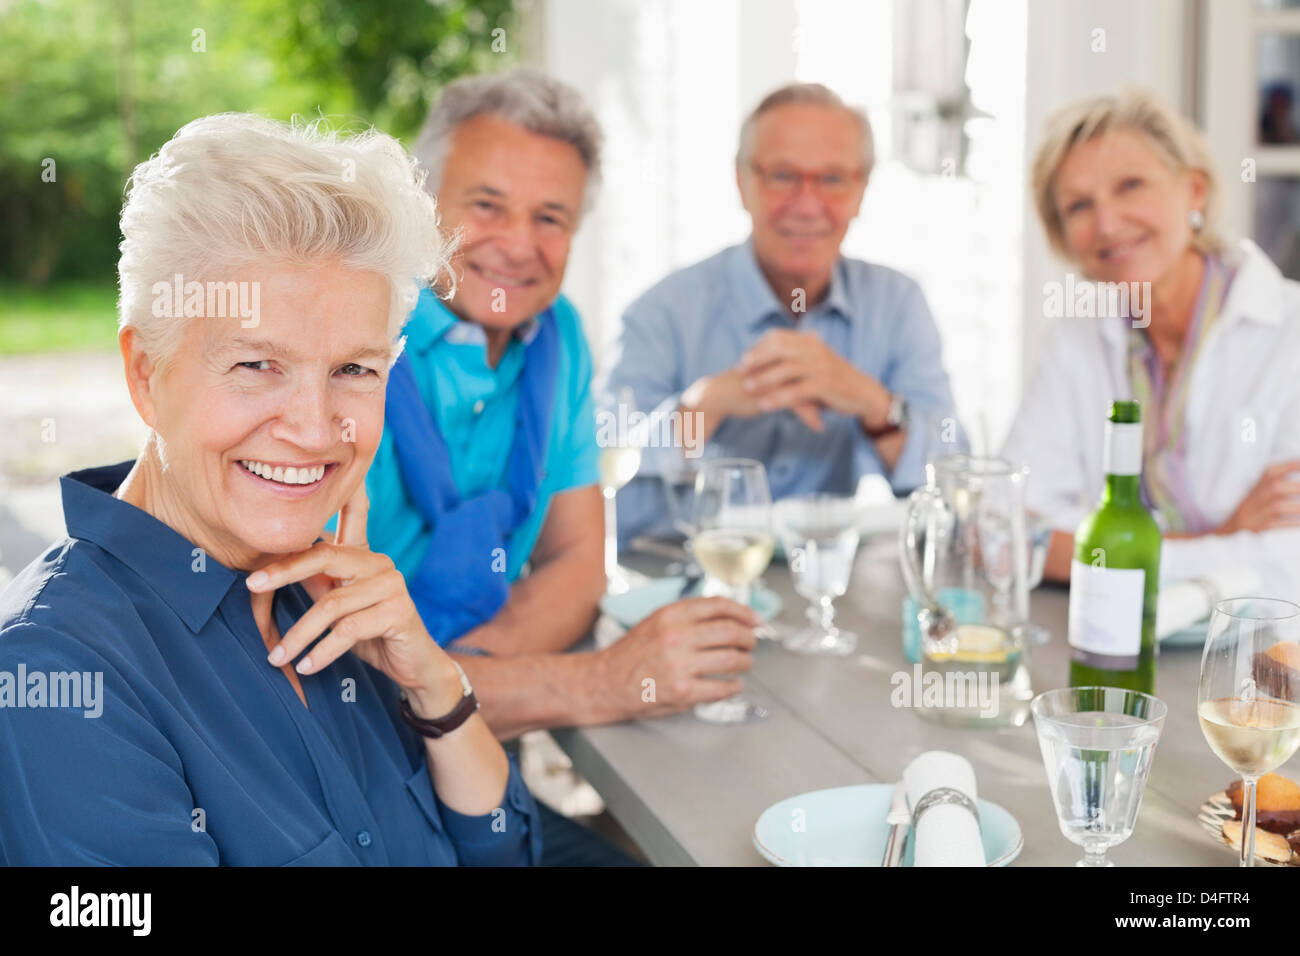 Friends smiling at table outdoors Stock Photo